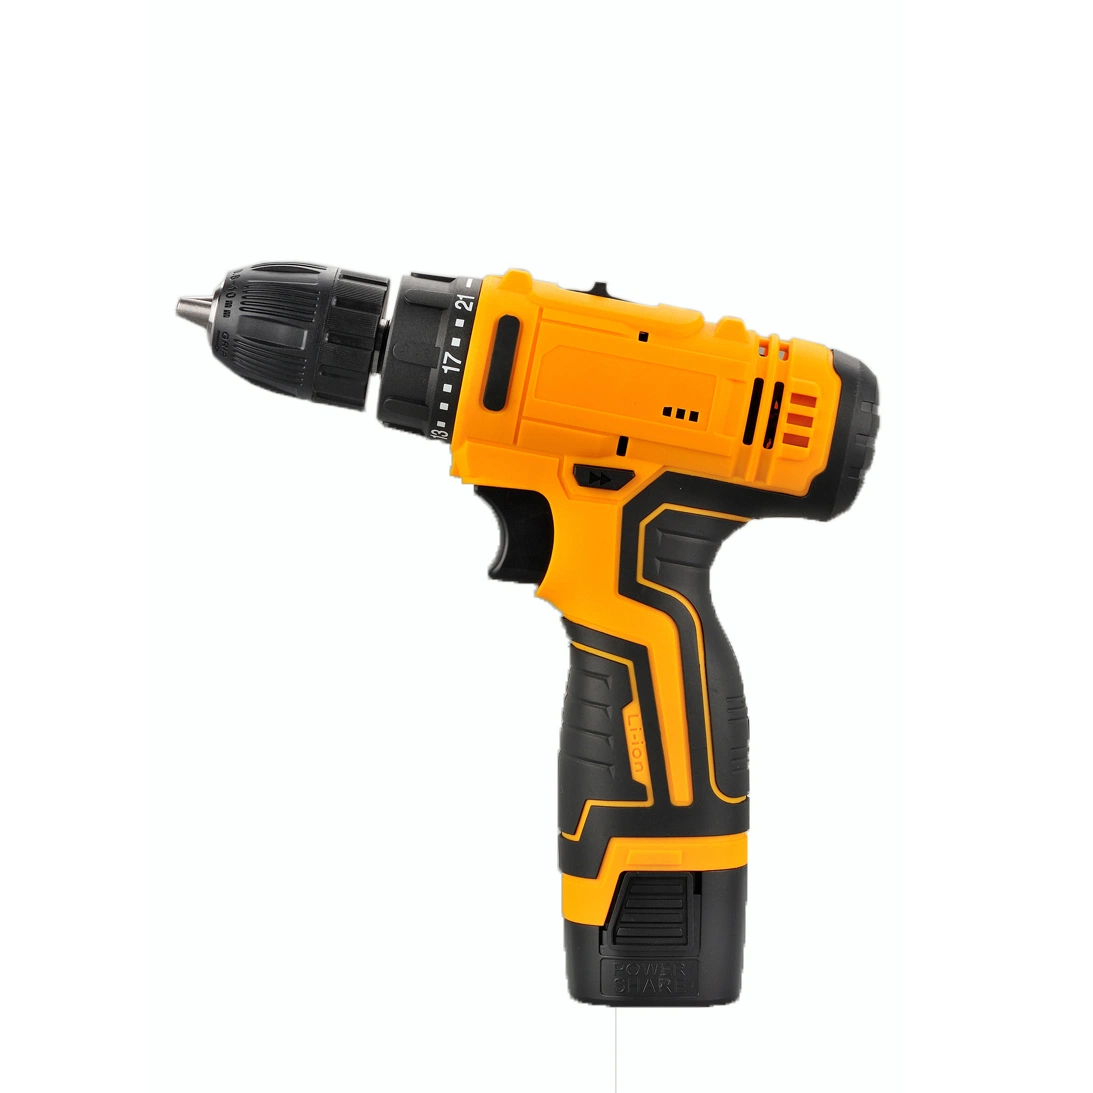 Handheld Lithium Battery Electric Drill Rechargeable Screwdriver Drilling Mounting Screws Home Power Tools EU Plug